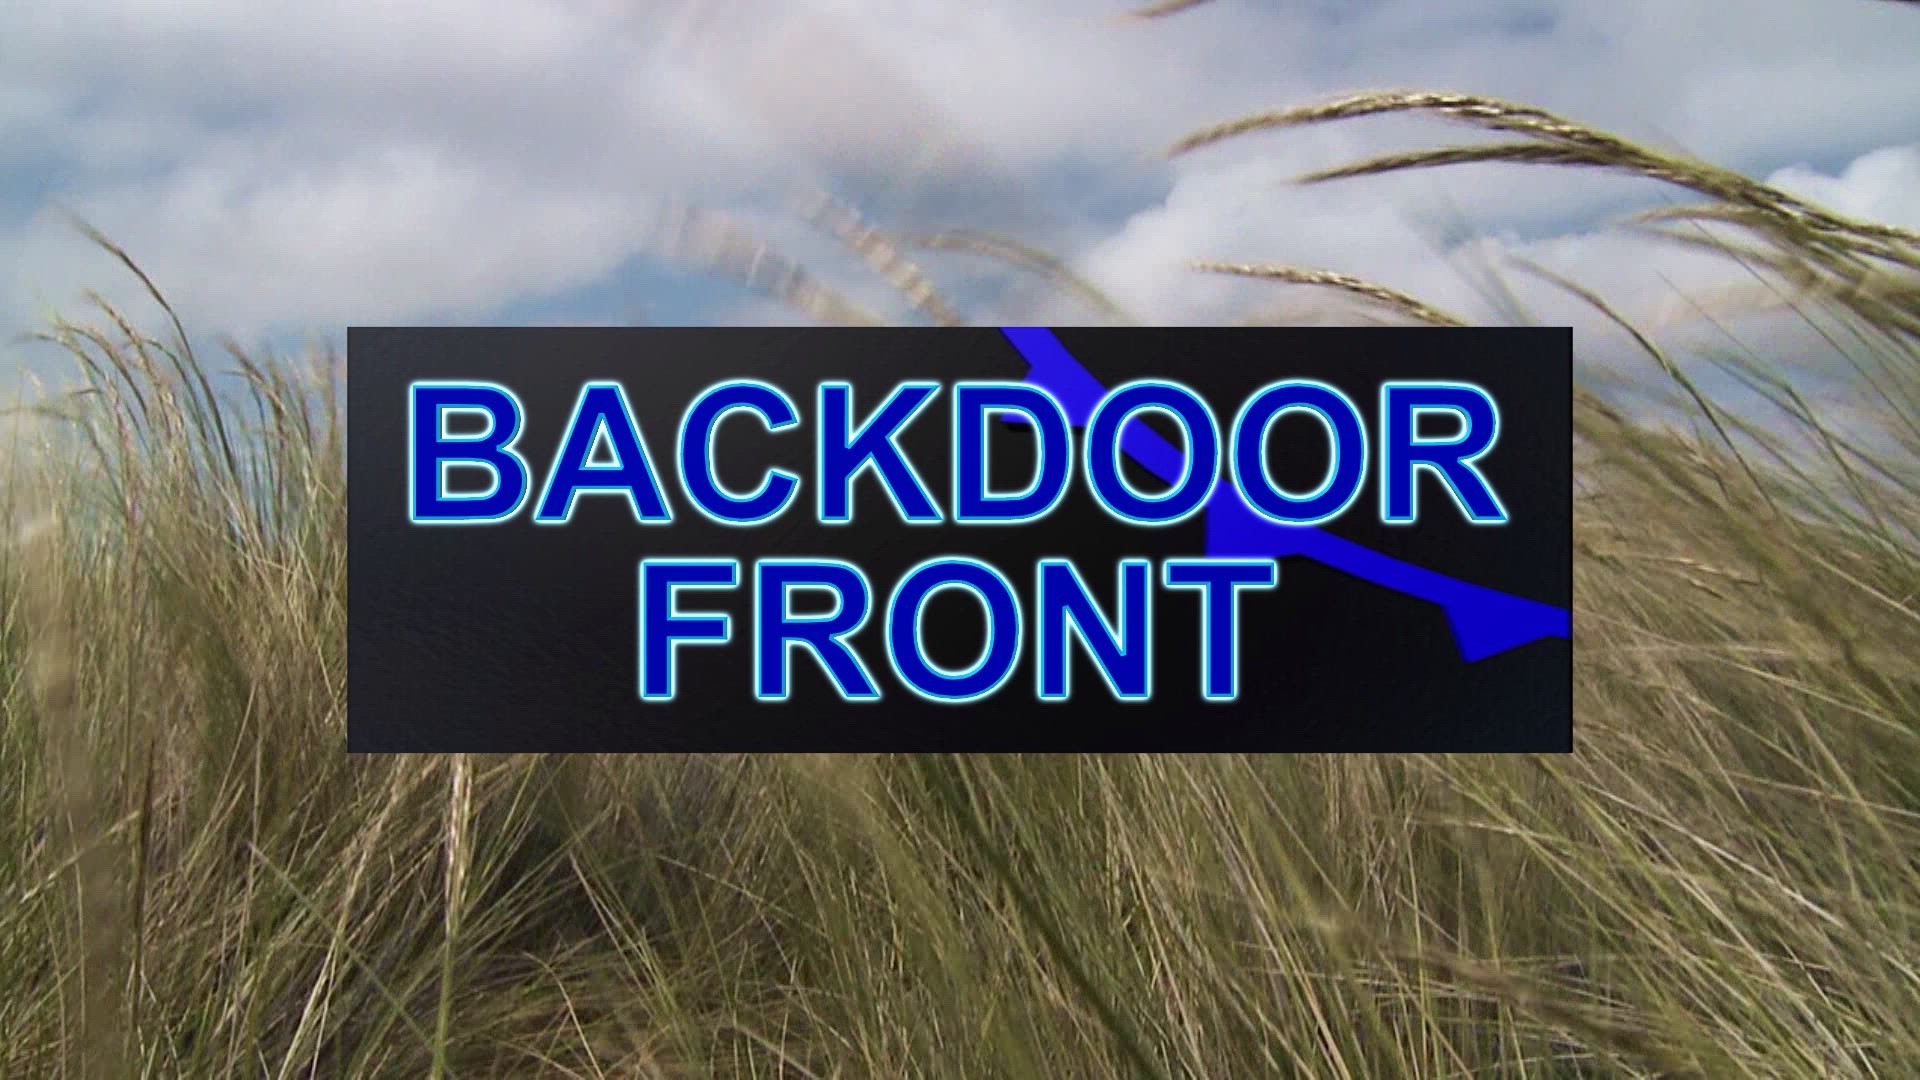 A "backdoor" cold front arrives from an "untypical" direction".